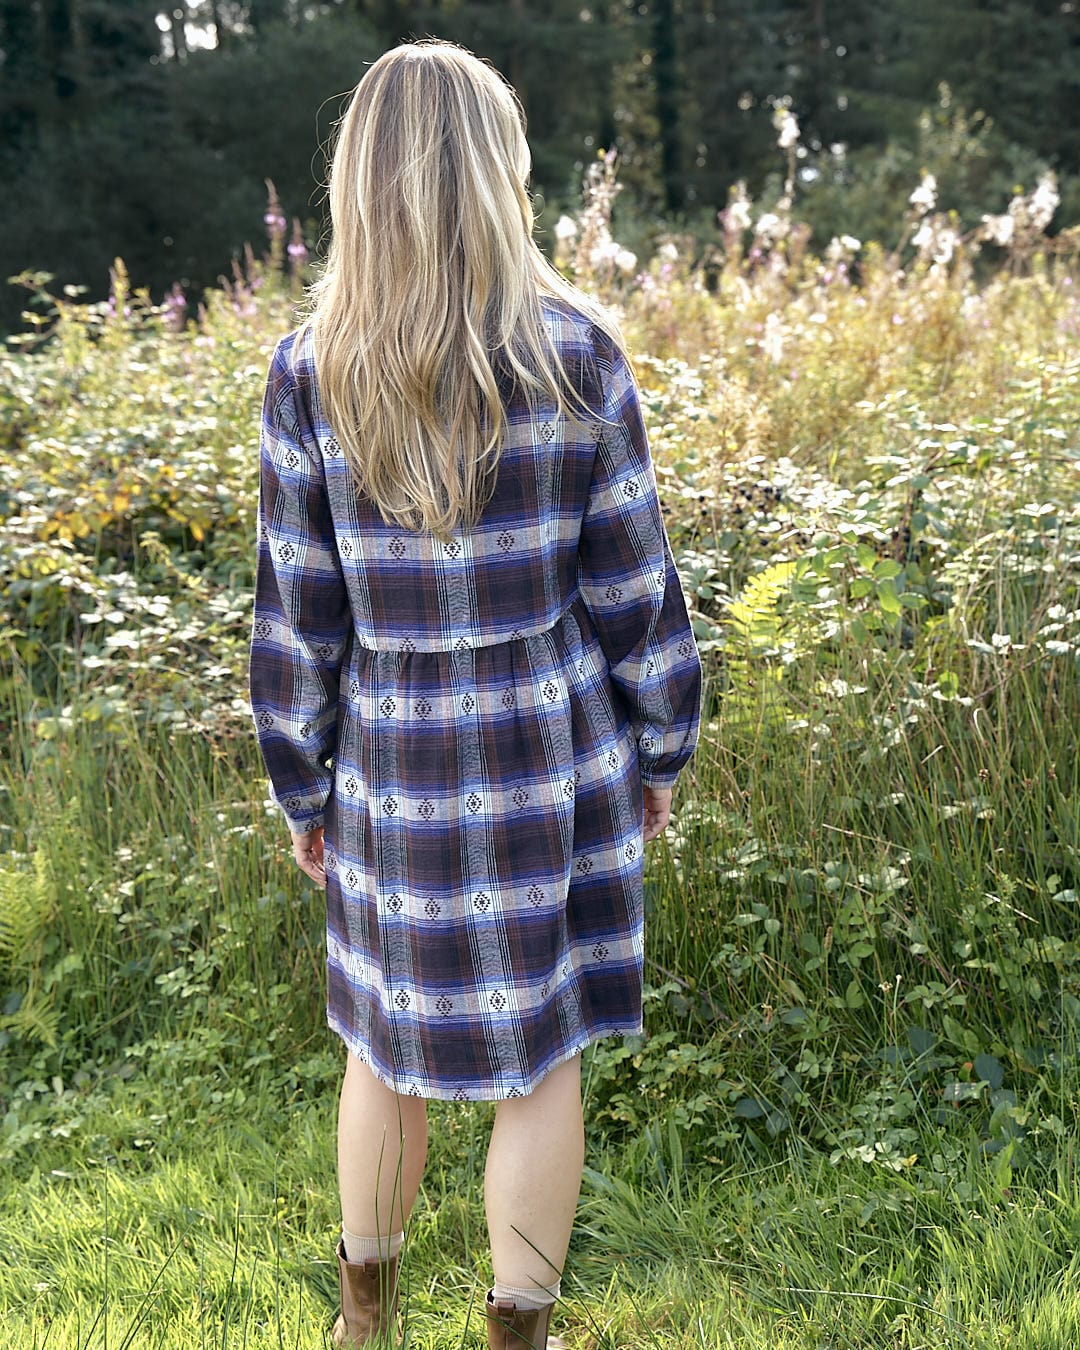 The back of a woman in a Saltrock Ivy - Womens Jacquard Check Shirt Dress - Purple standing in a field.